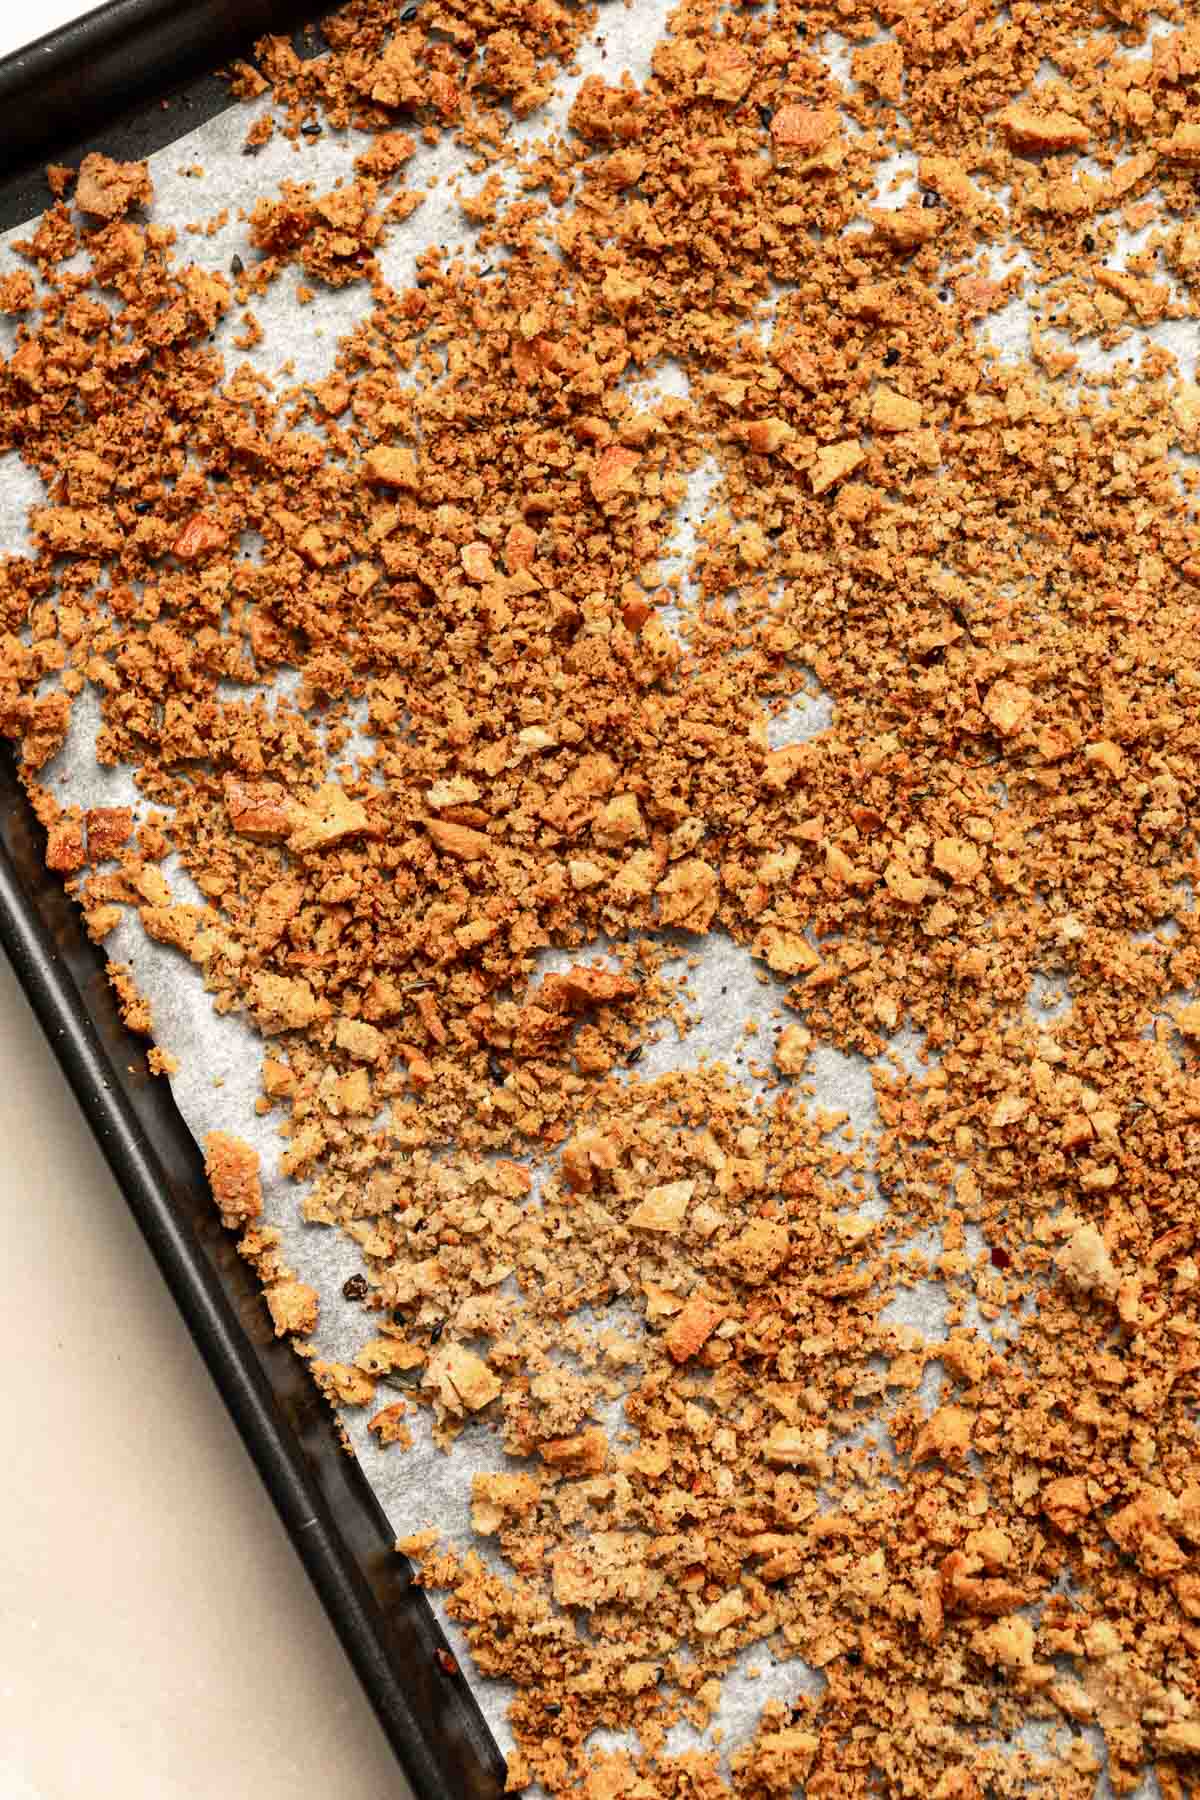 Breadcrumbs laid out on a lined baking sheet after baking in the oven.